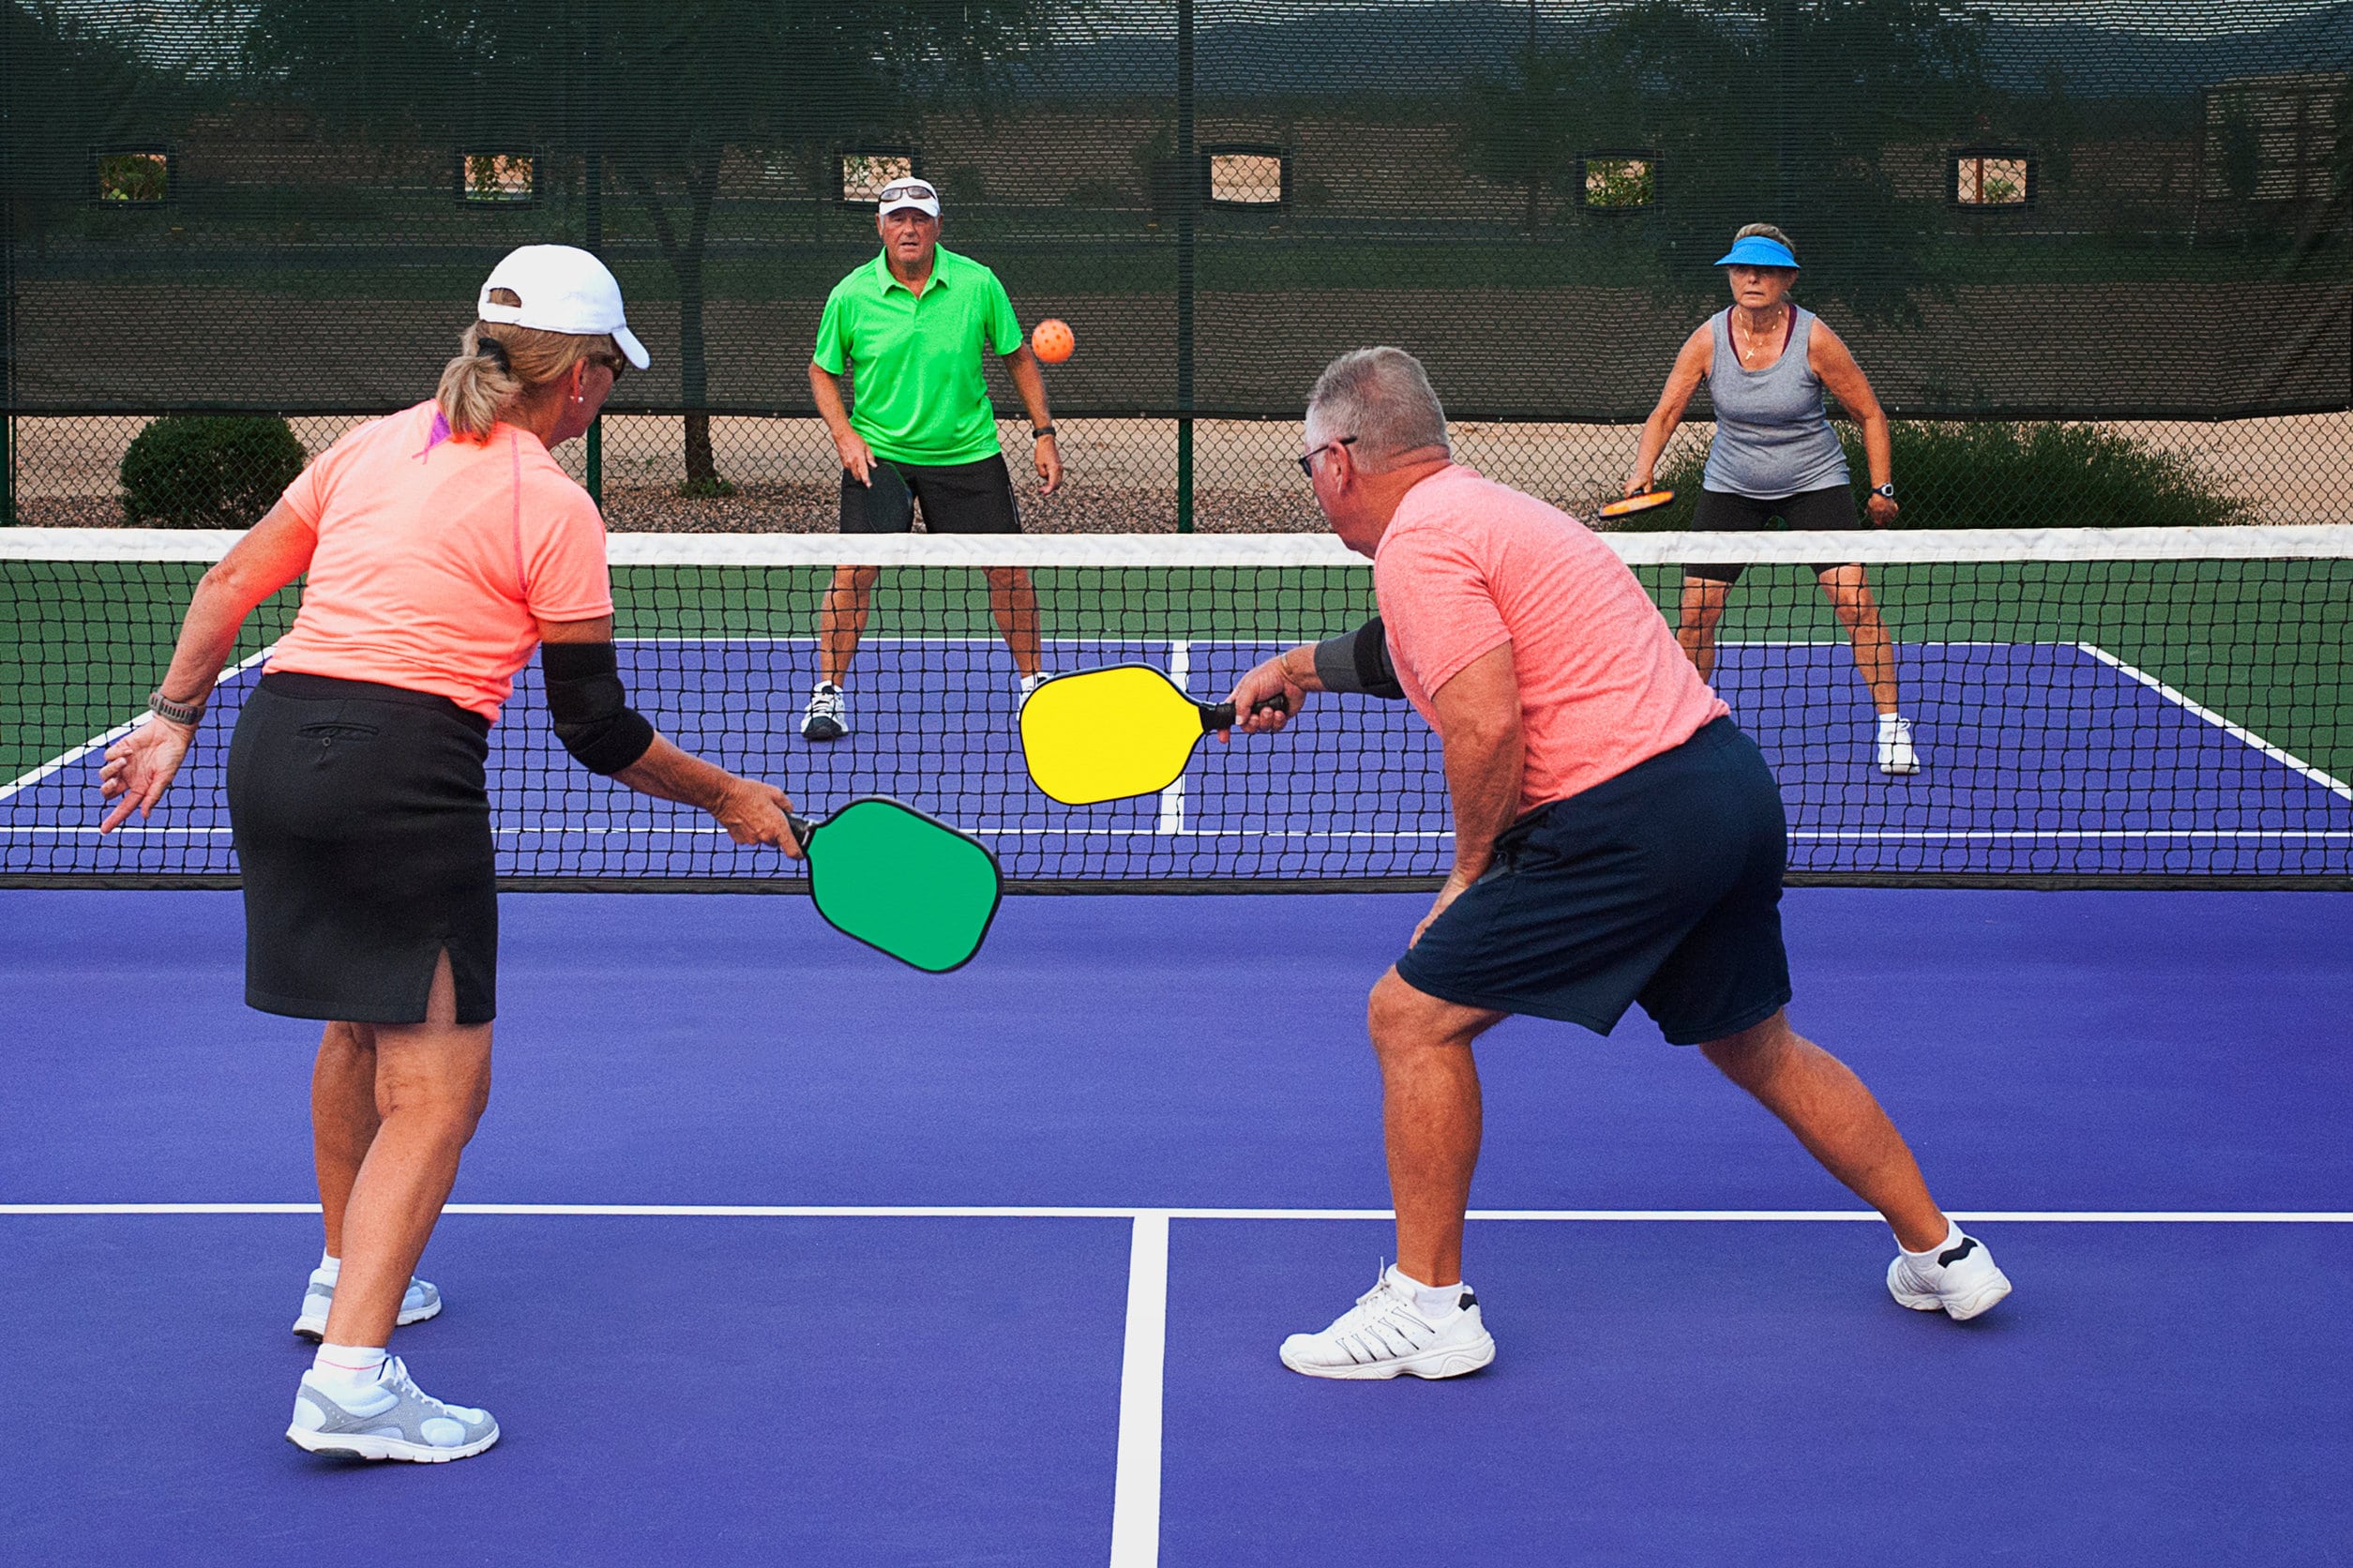 Is Pickleball is Gaining More Popularity Than Tennis?